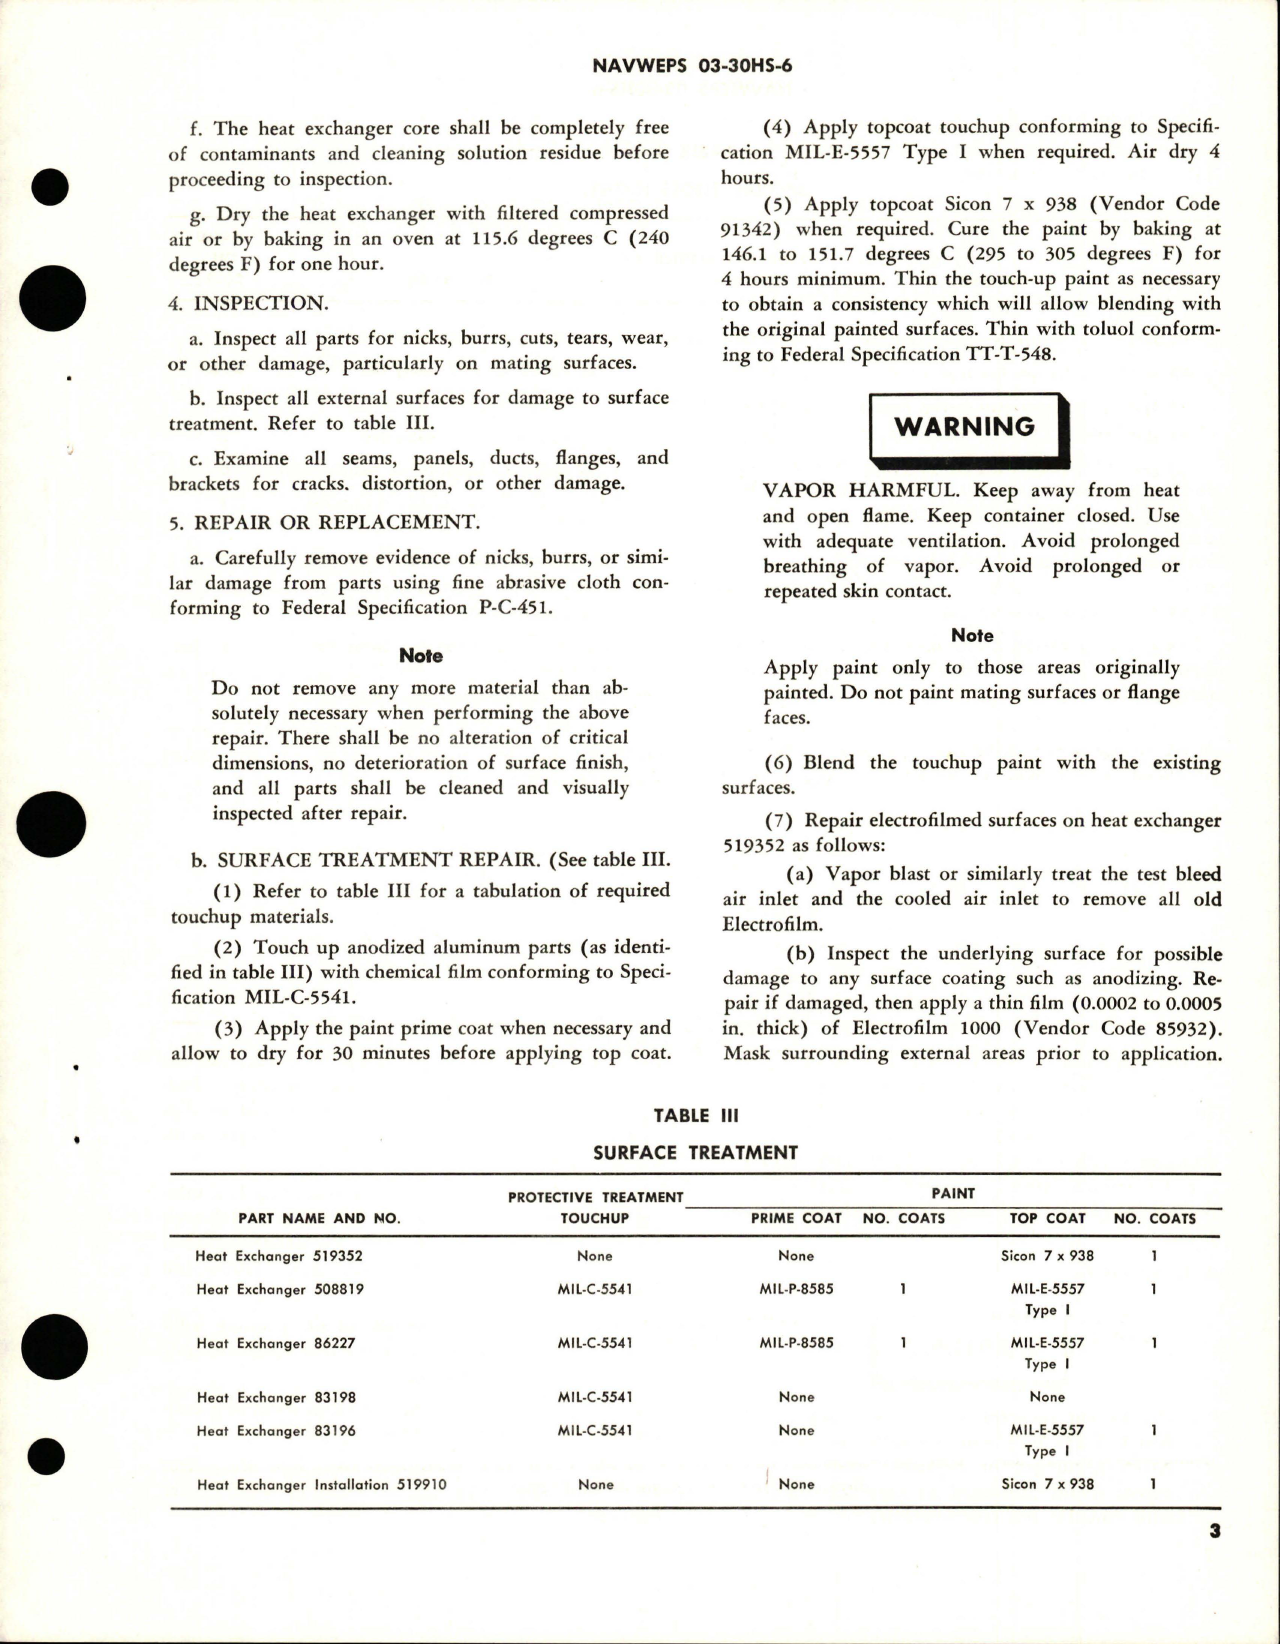 Sample page 5 from AirCorps Library document: Overhaul Instructions with Parts Breakdown for Heat Exchanger and Heat Exchanger Installation